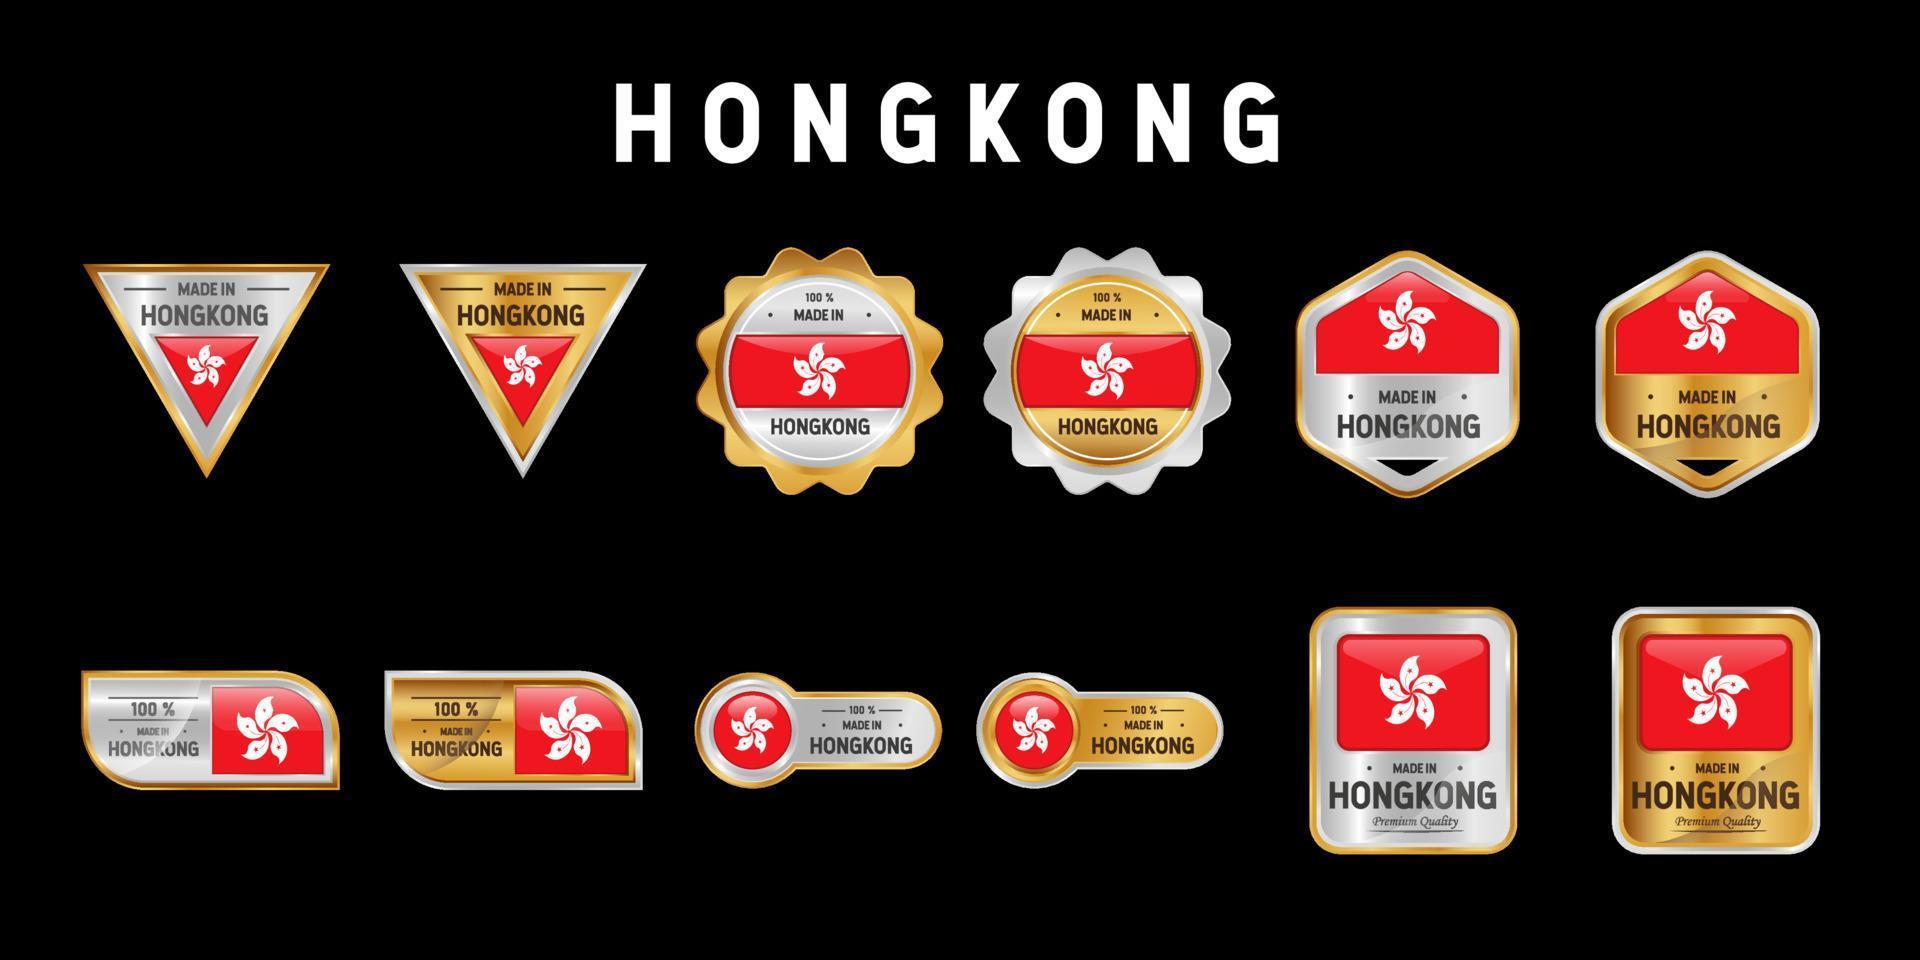 Made in Hongkong Label, Stamp, Badge, or Logo. With The National Flag of Hongkong. On platinum, gold, and silver colors. Premium and Luxury Emblem vector